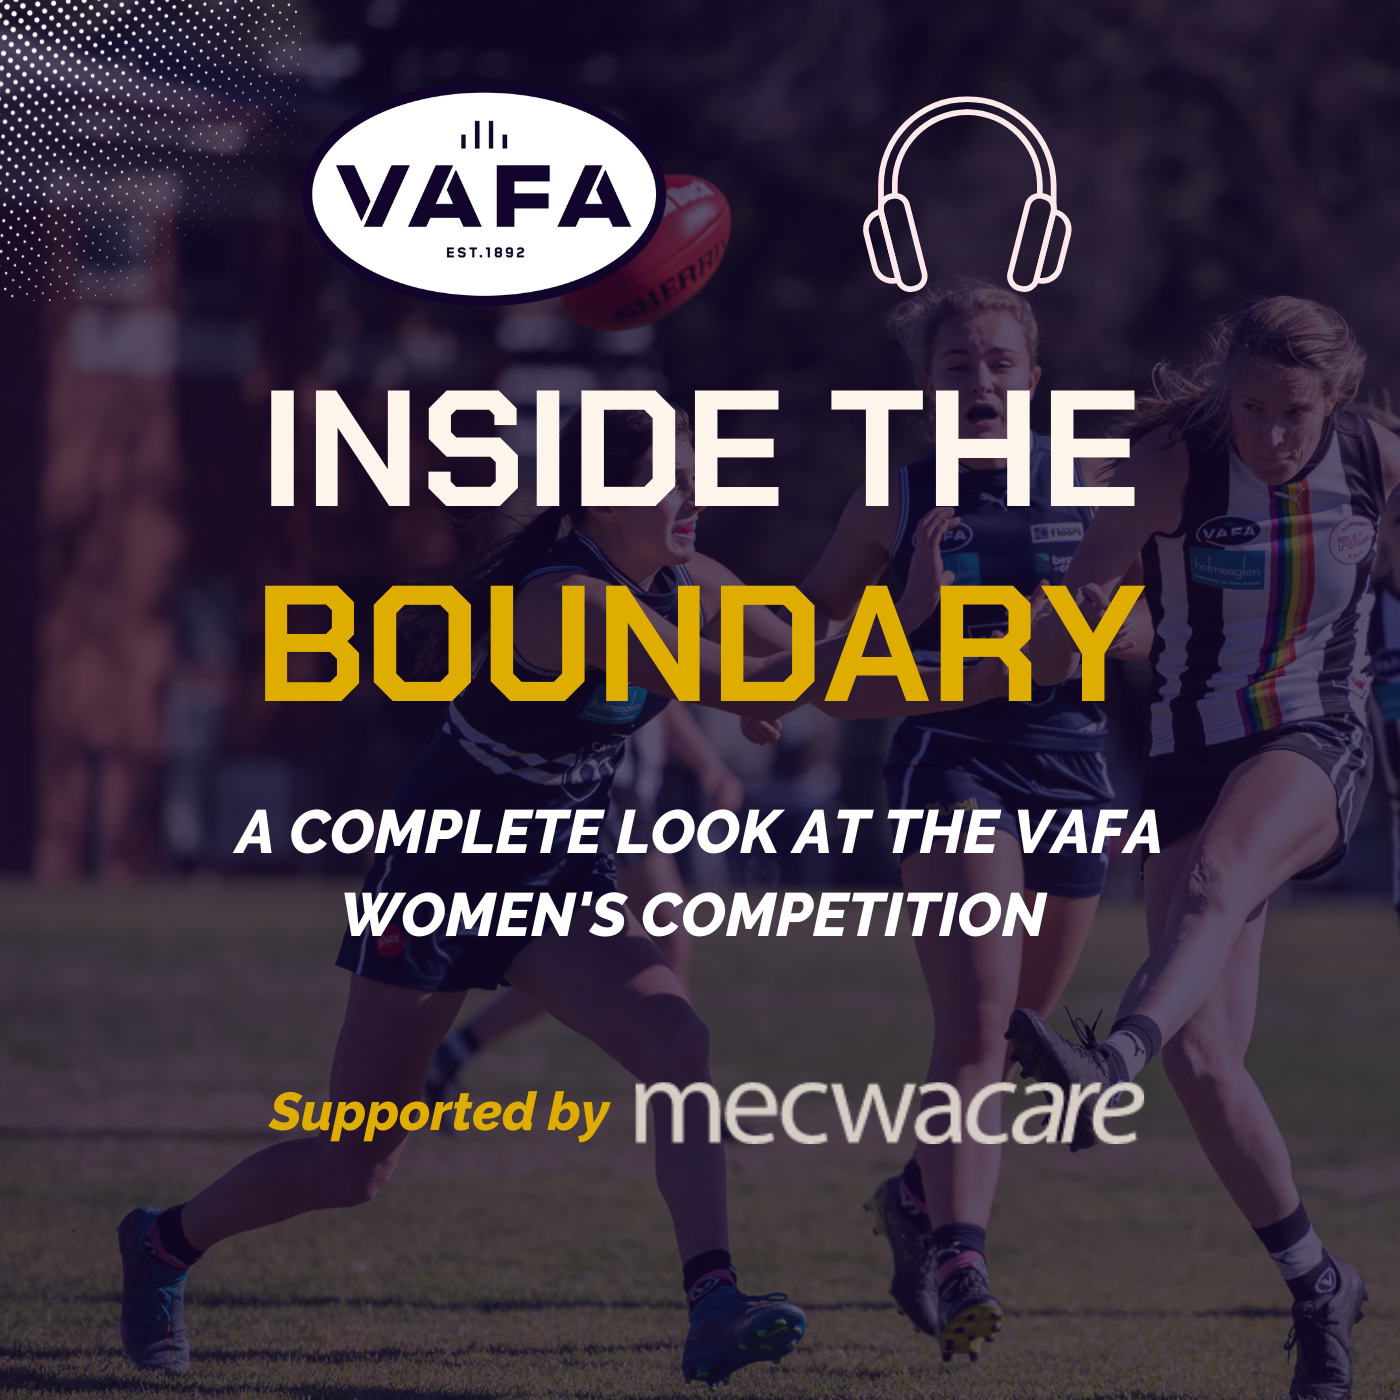 Inside the Boundary - Previewing the Division Finals Series